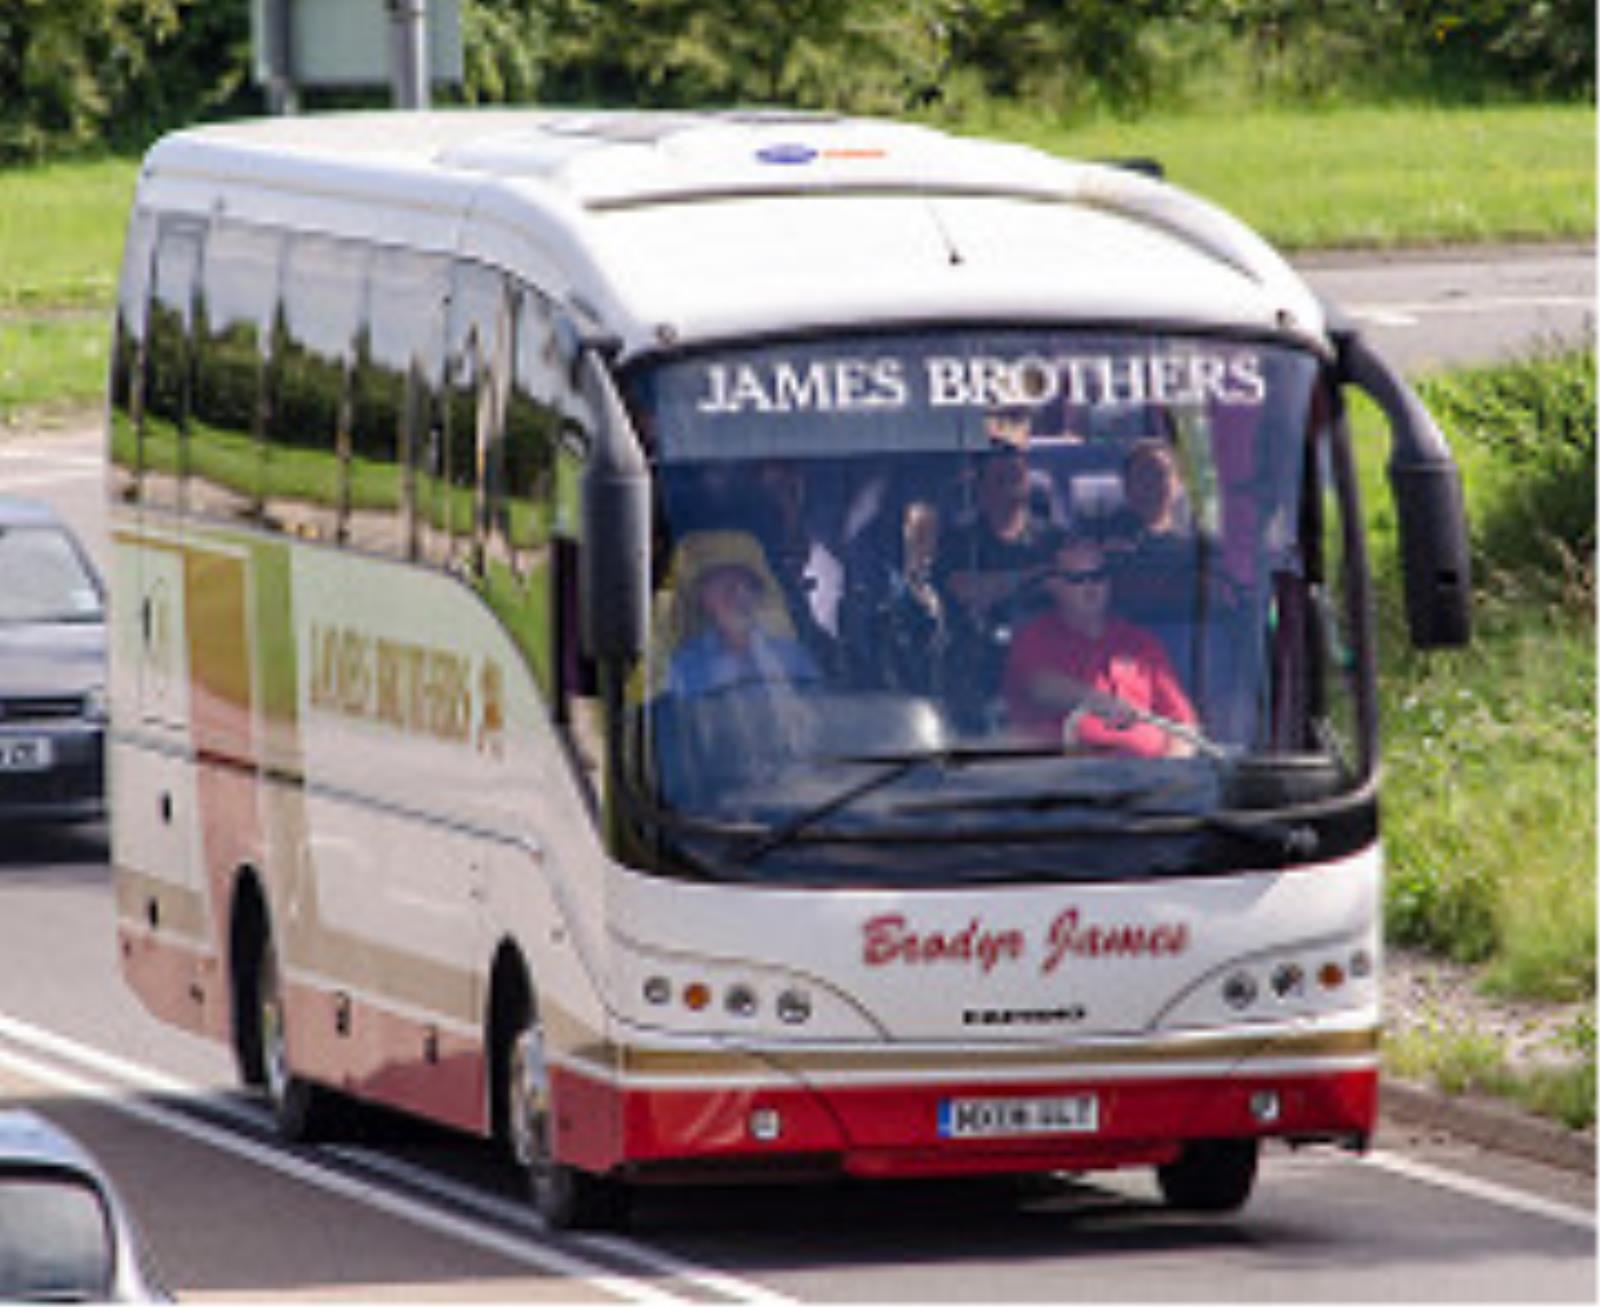 ULT 35 Seater CoachBrodyr James Coaches For Hire